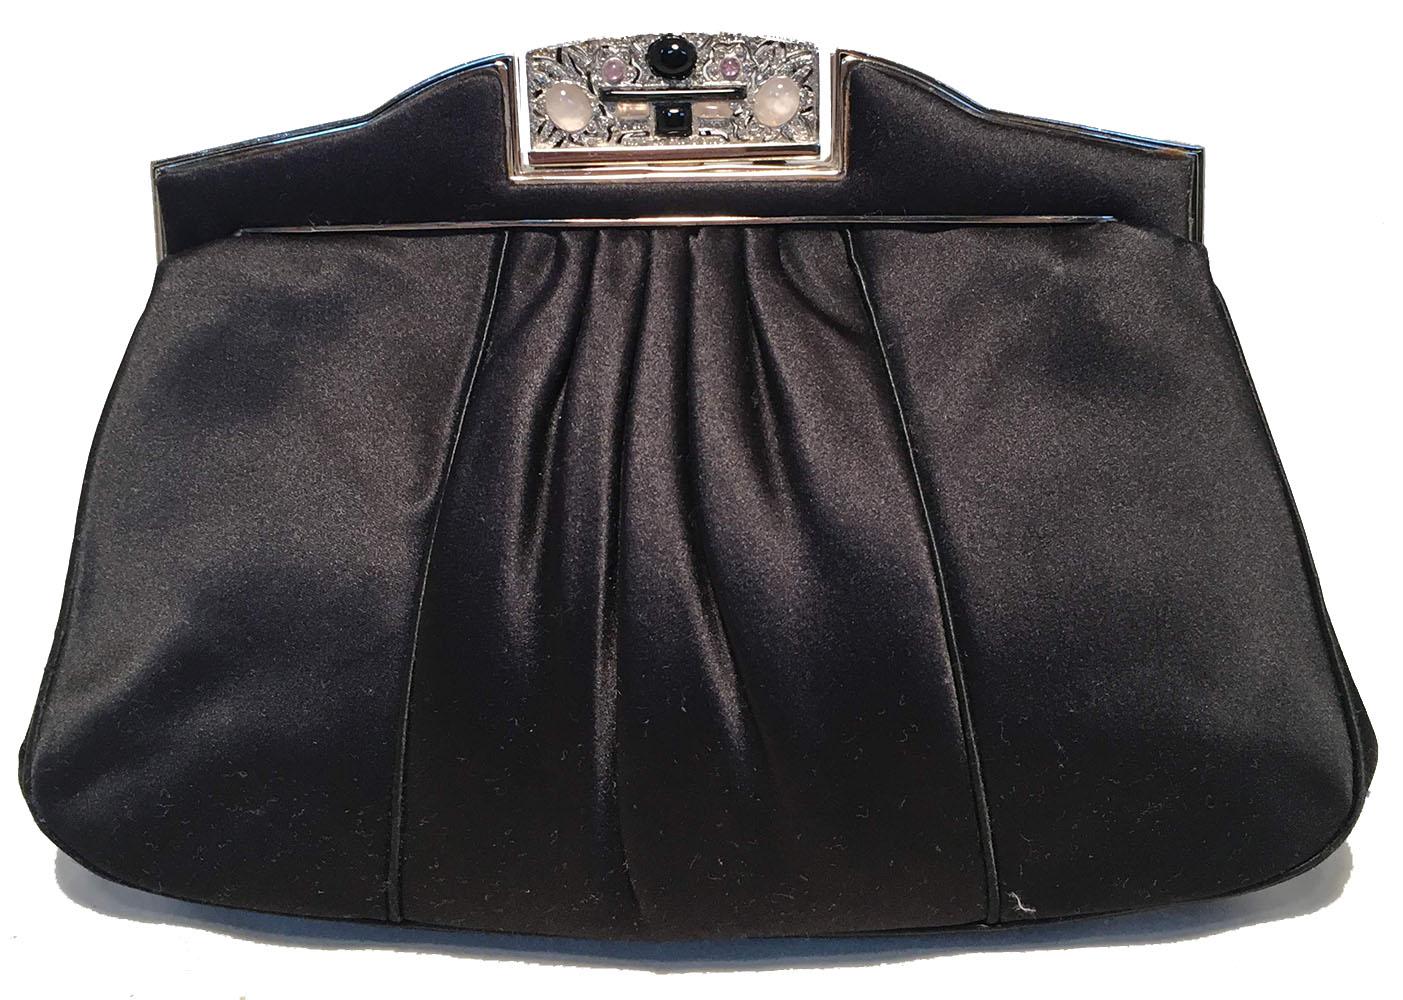 BEAUTIFUL vintage Judith Leiber black silk clutch in excellent vintage condition. Black pleated silk satin exterior trimmed with silver hardware. top lifting closure opens to a black silk lined interior that holds 1 slit and 1 zippered side pocket